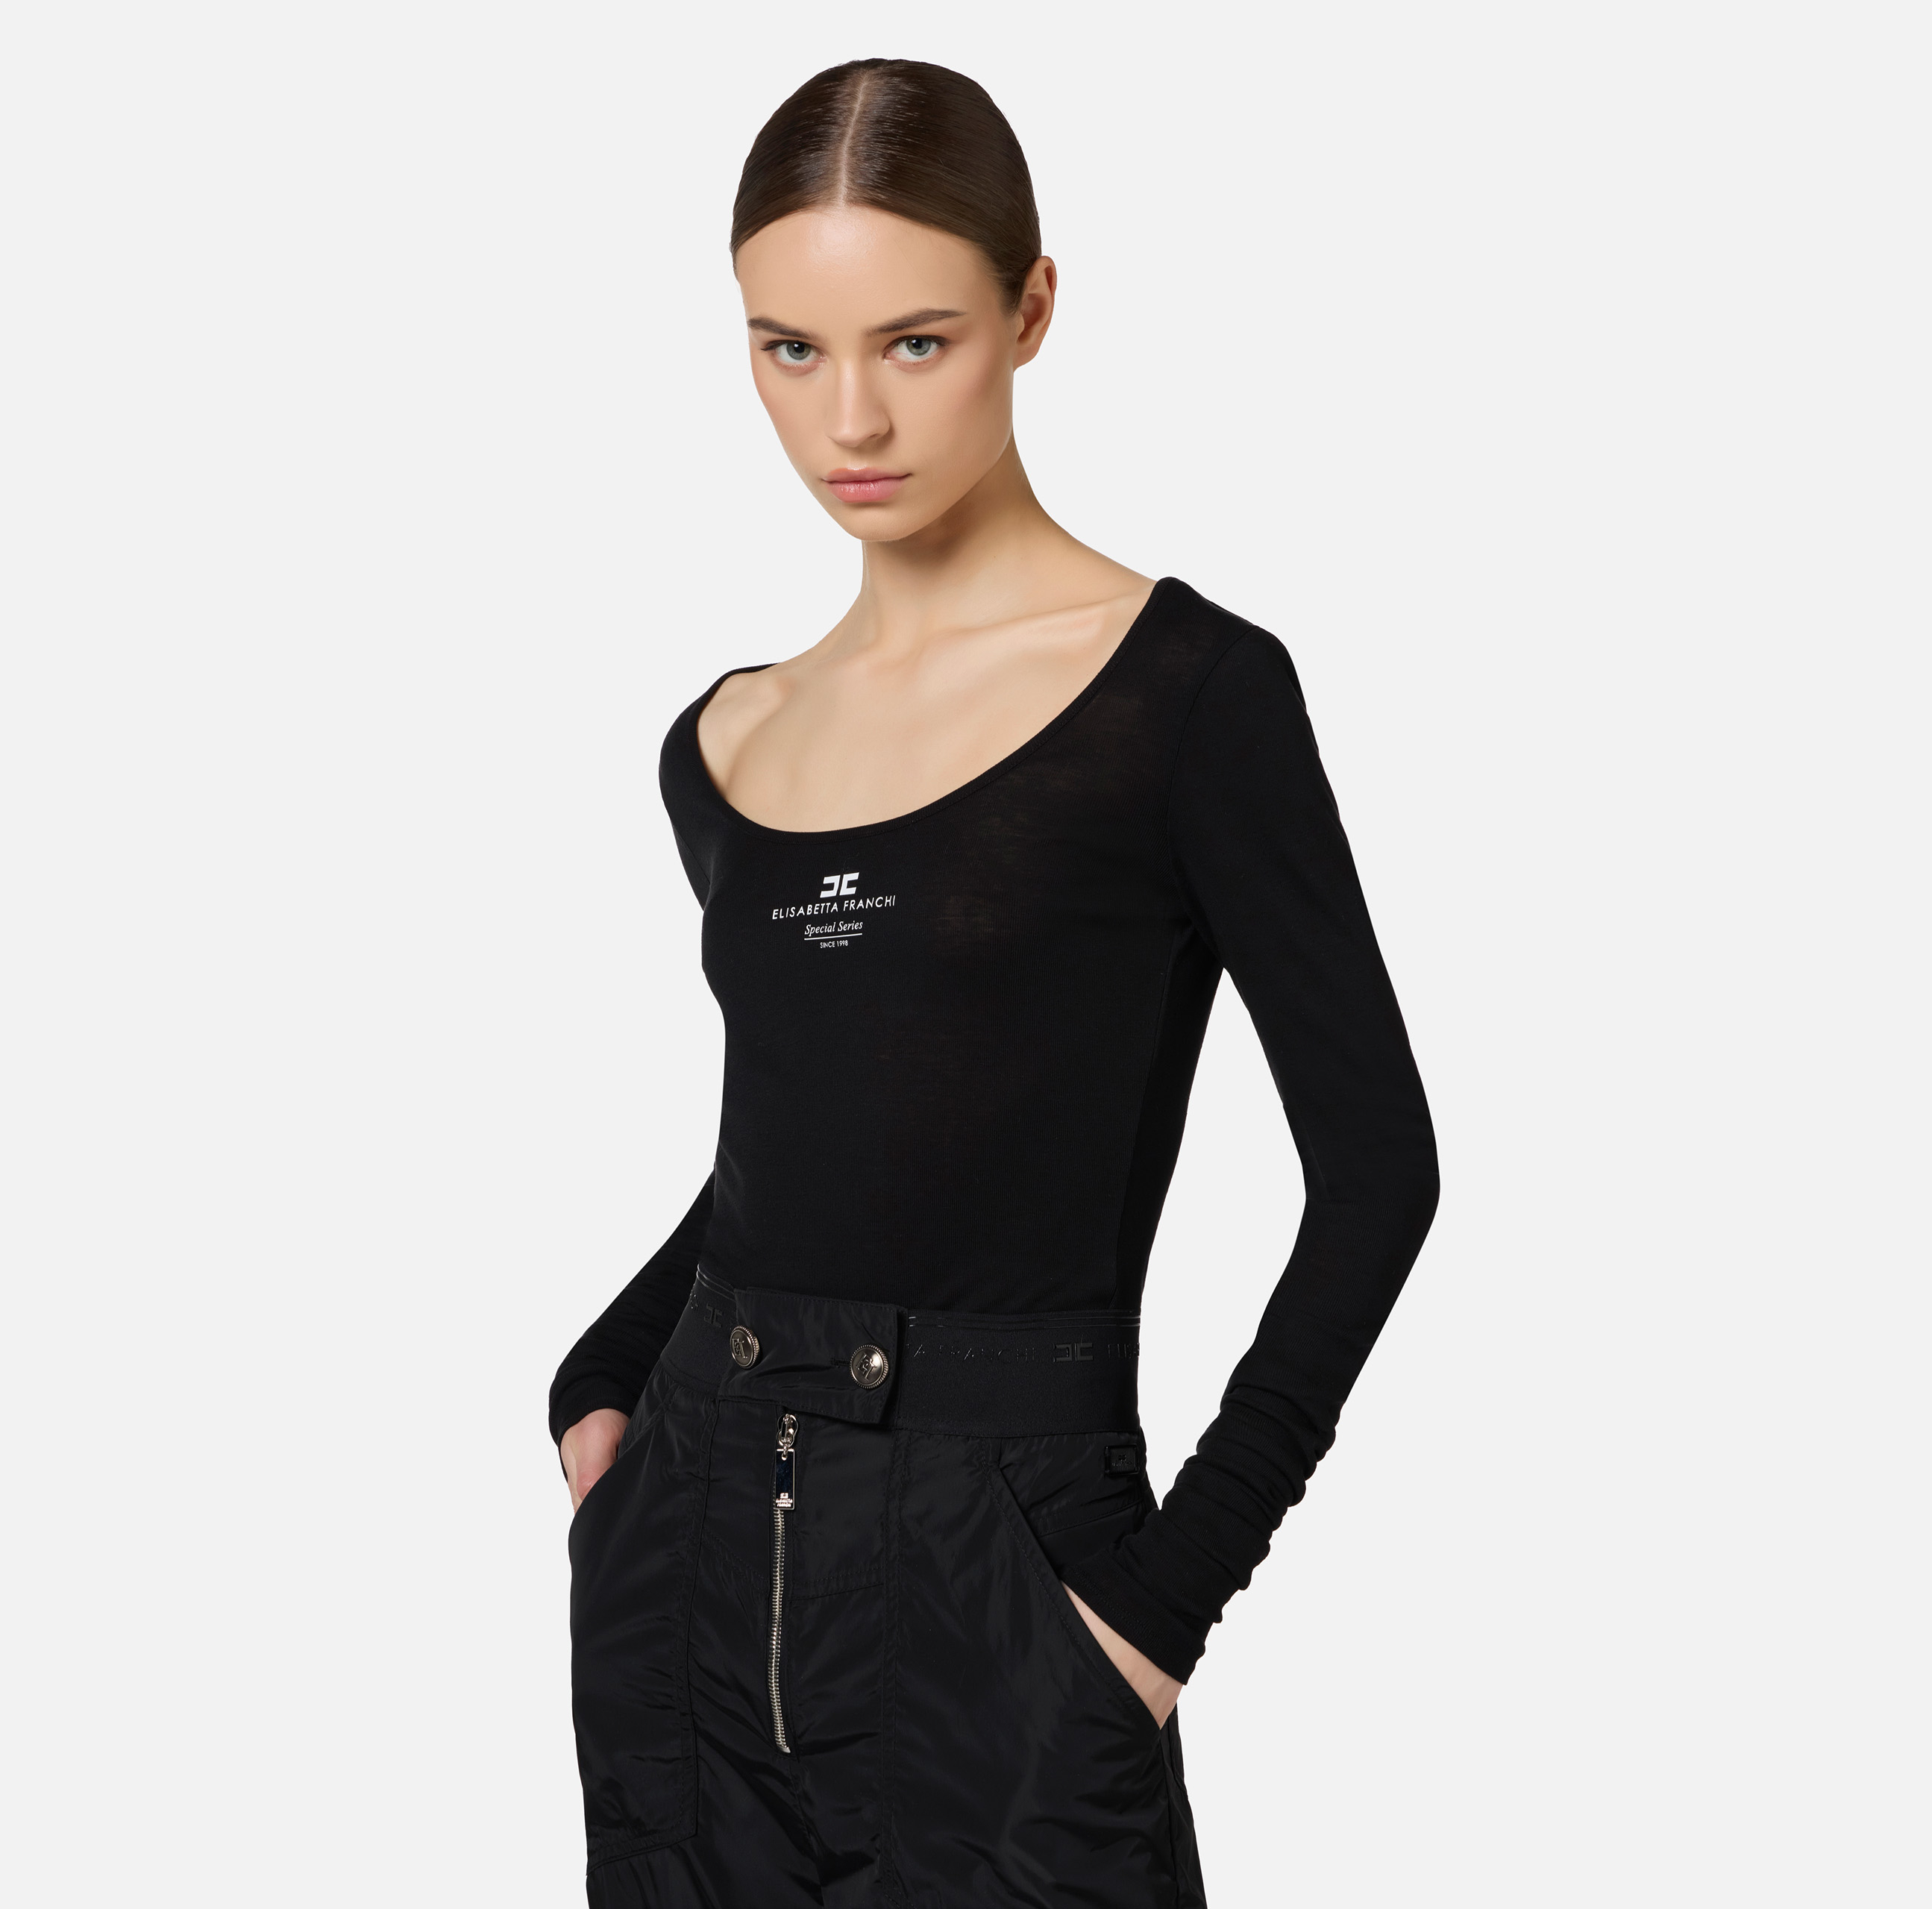 Wool and jersey top with logo - Elisabetta Franchi